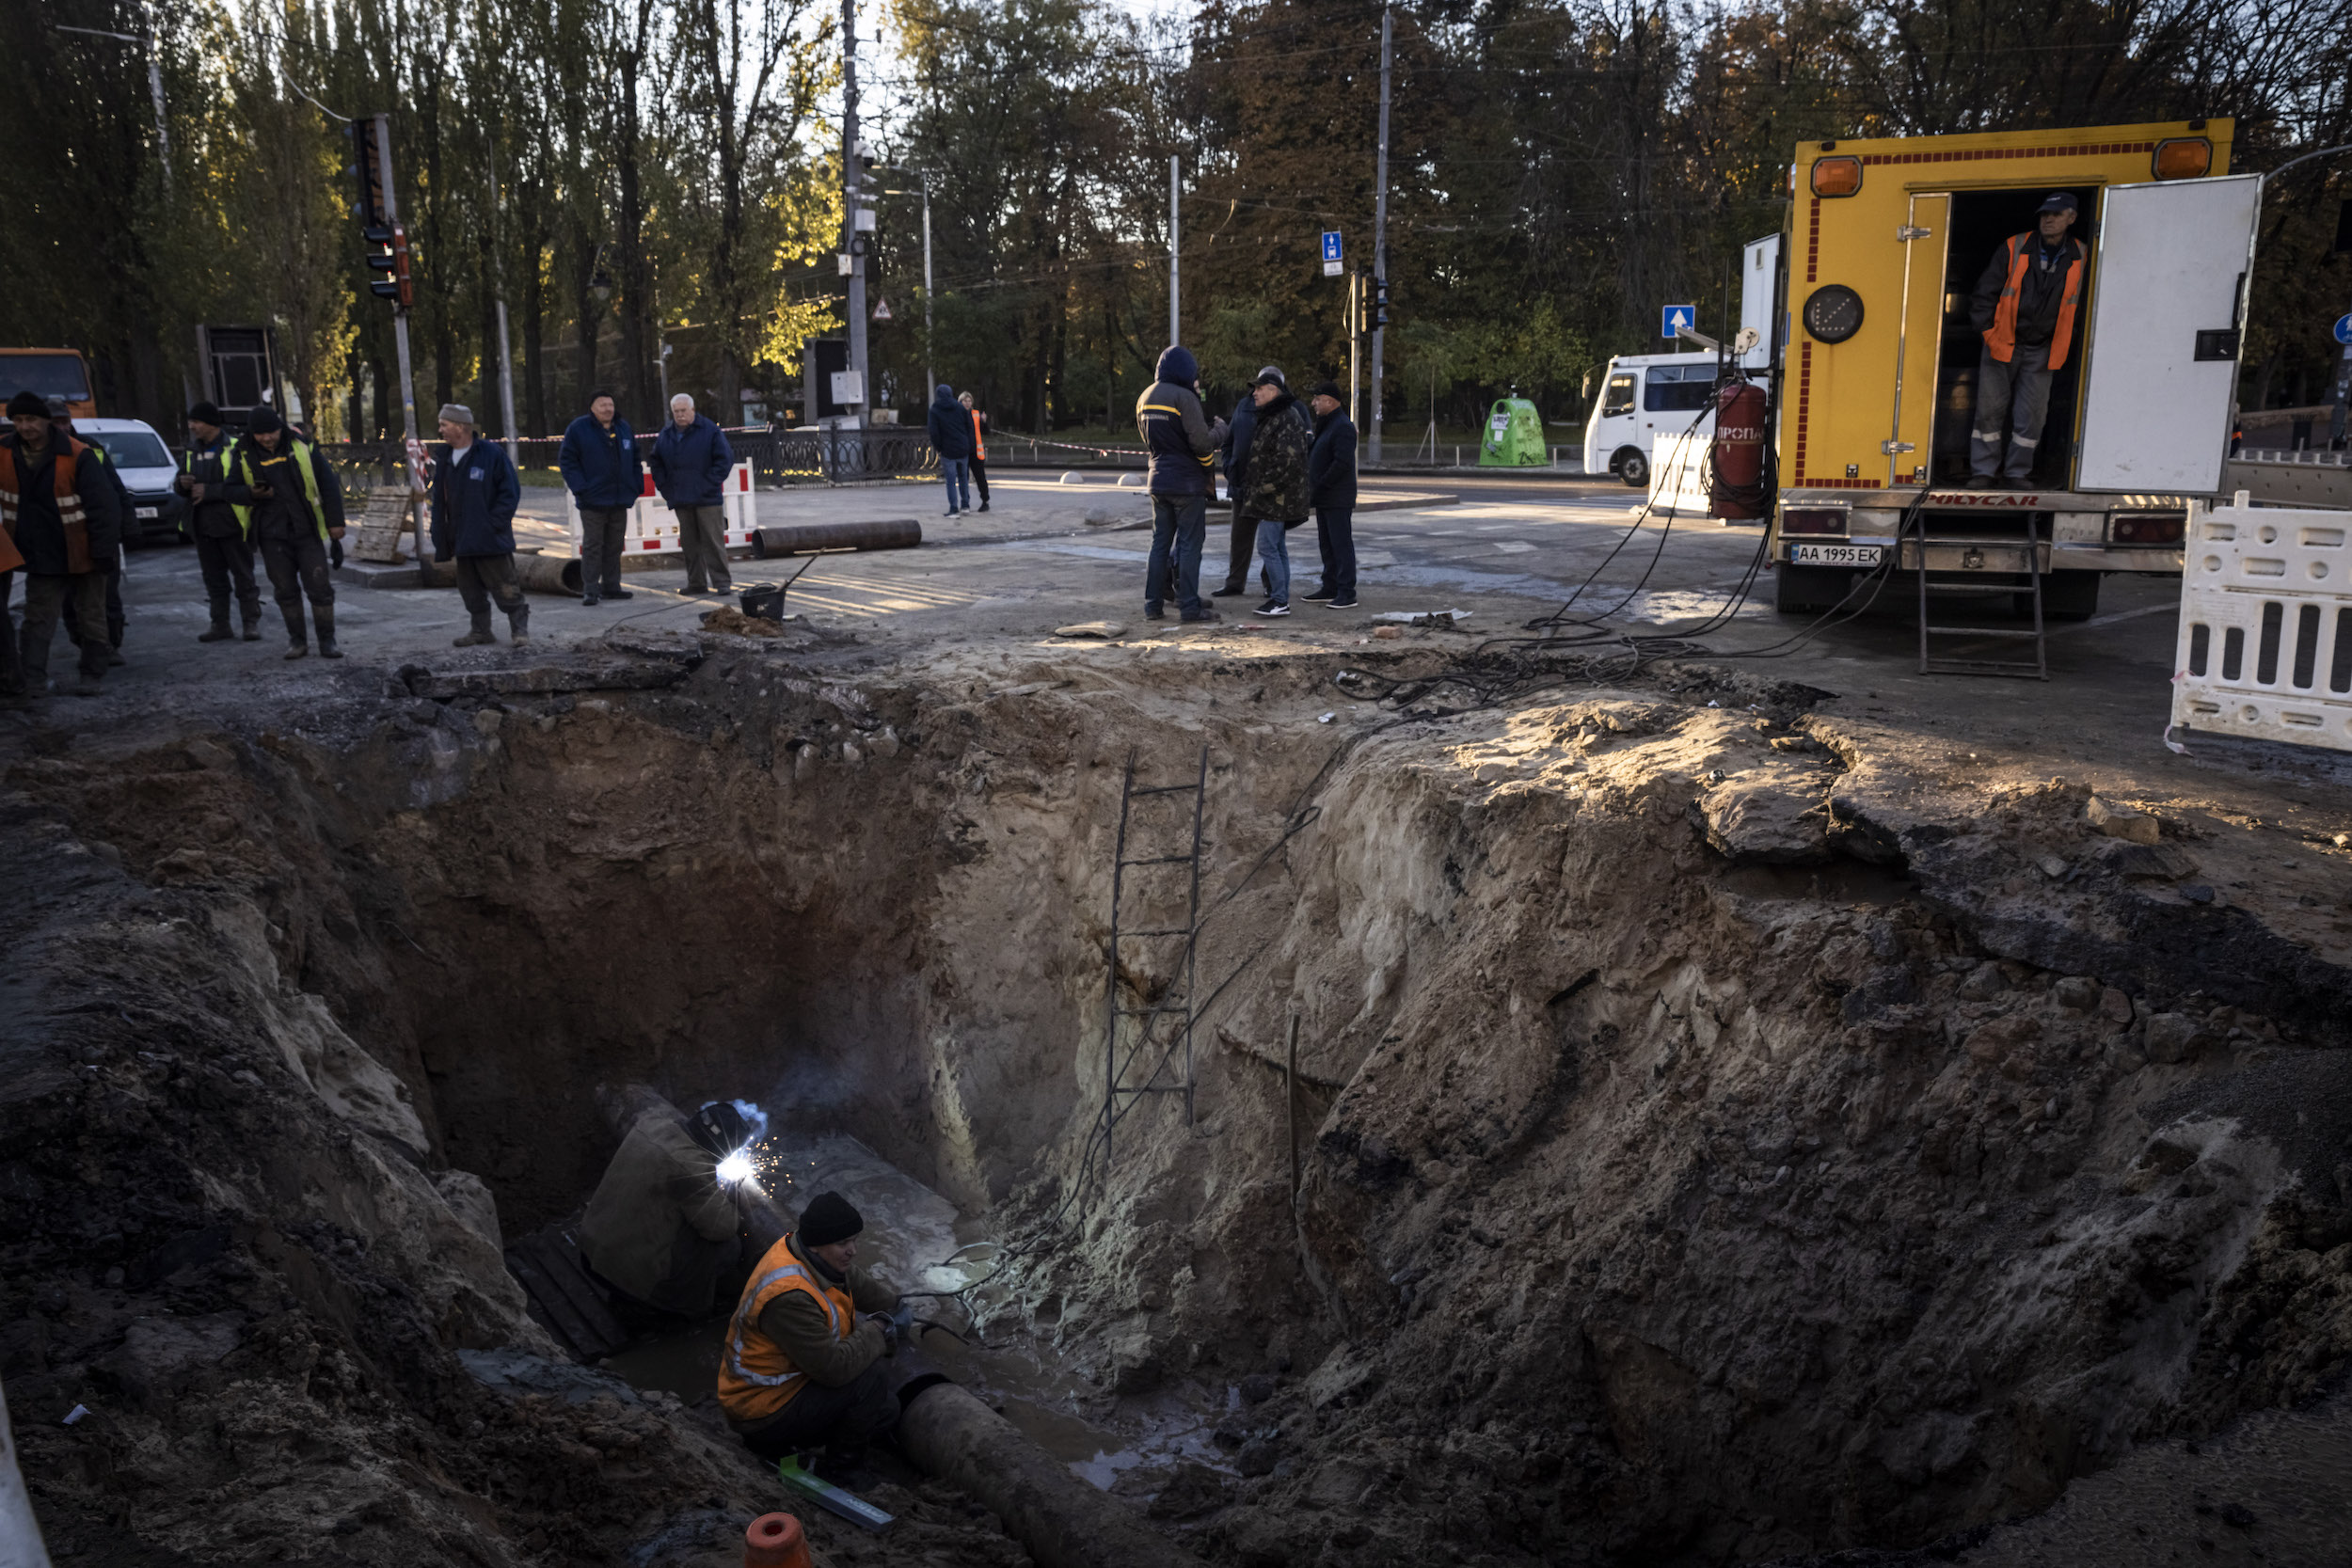 Workers in crater left by a missile strike the day before near Taras Shevchenko National University on October 11, in Kyiv.